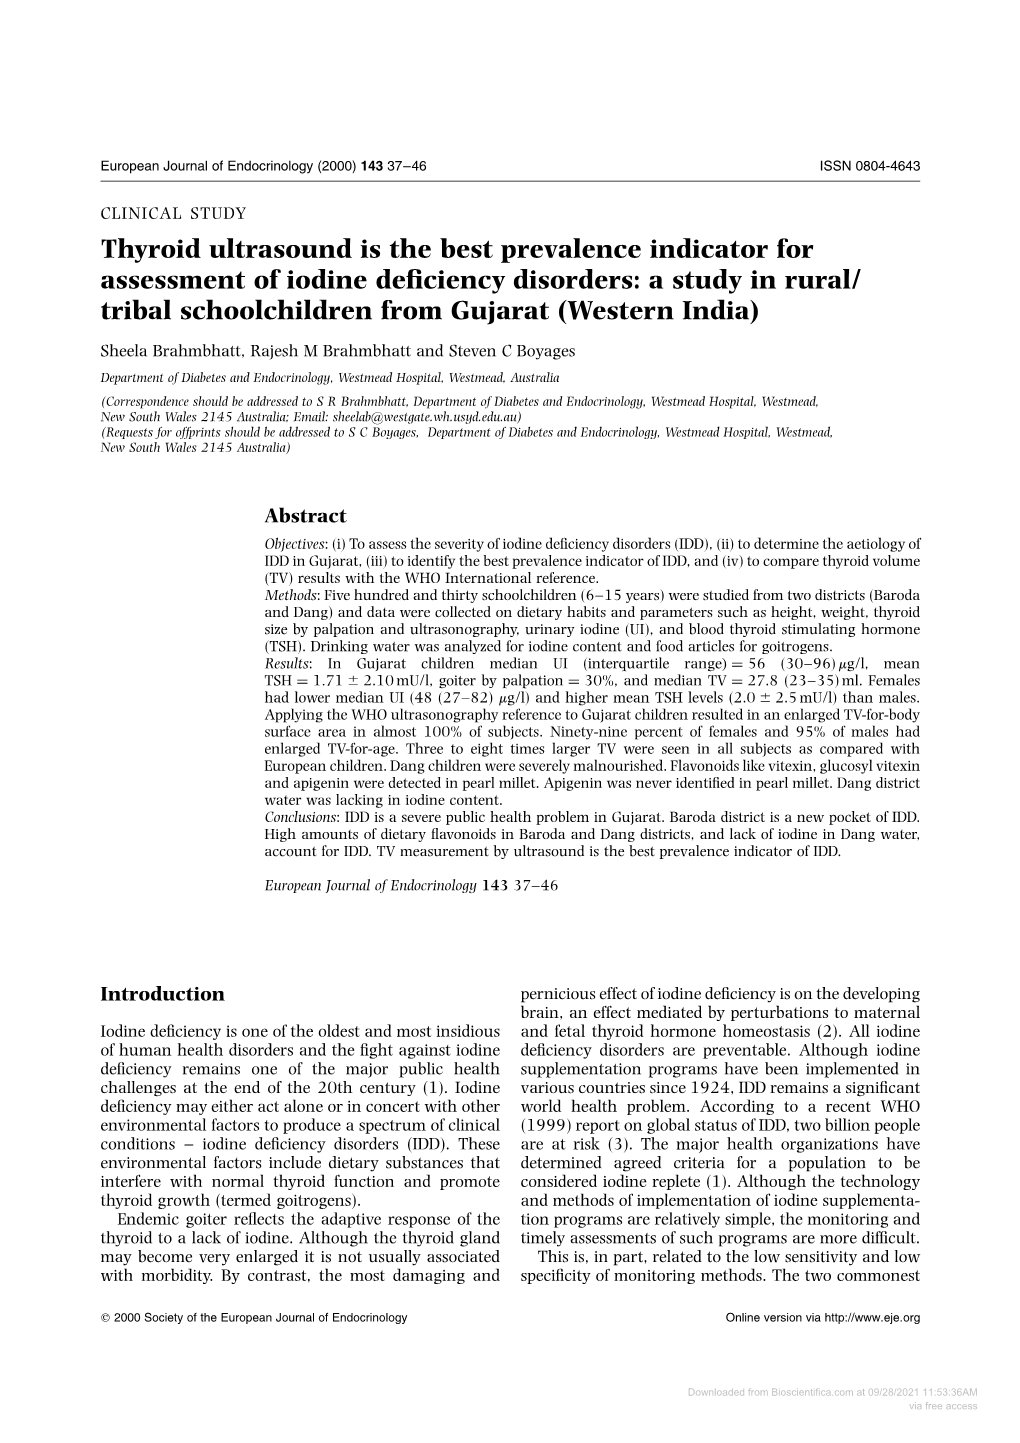 Thyroid Ultrasound Is the Best Prevalence Indicator for Assessment of Iodine De®Ciency Disorders: a Study in Rural/ Tribal Schoolchildren from Gujarat (Western India)